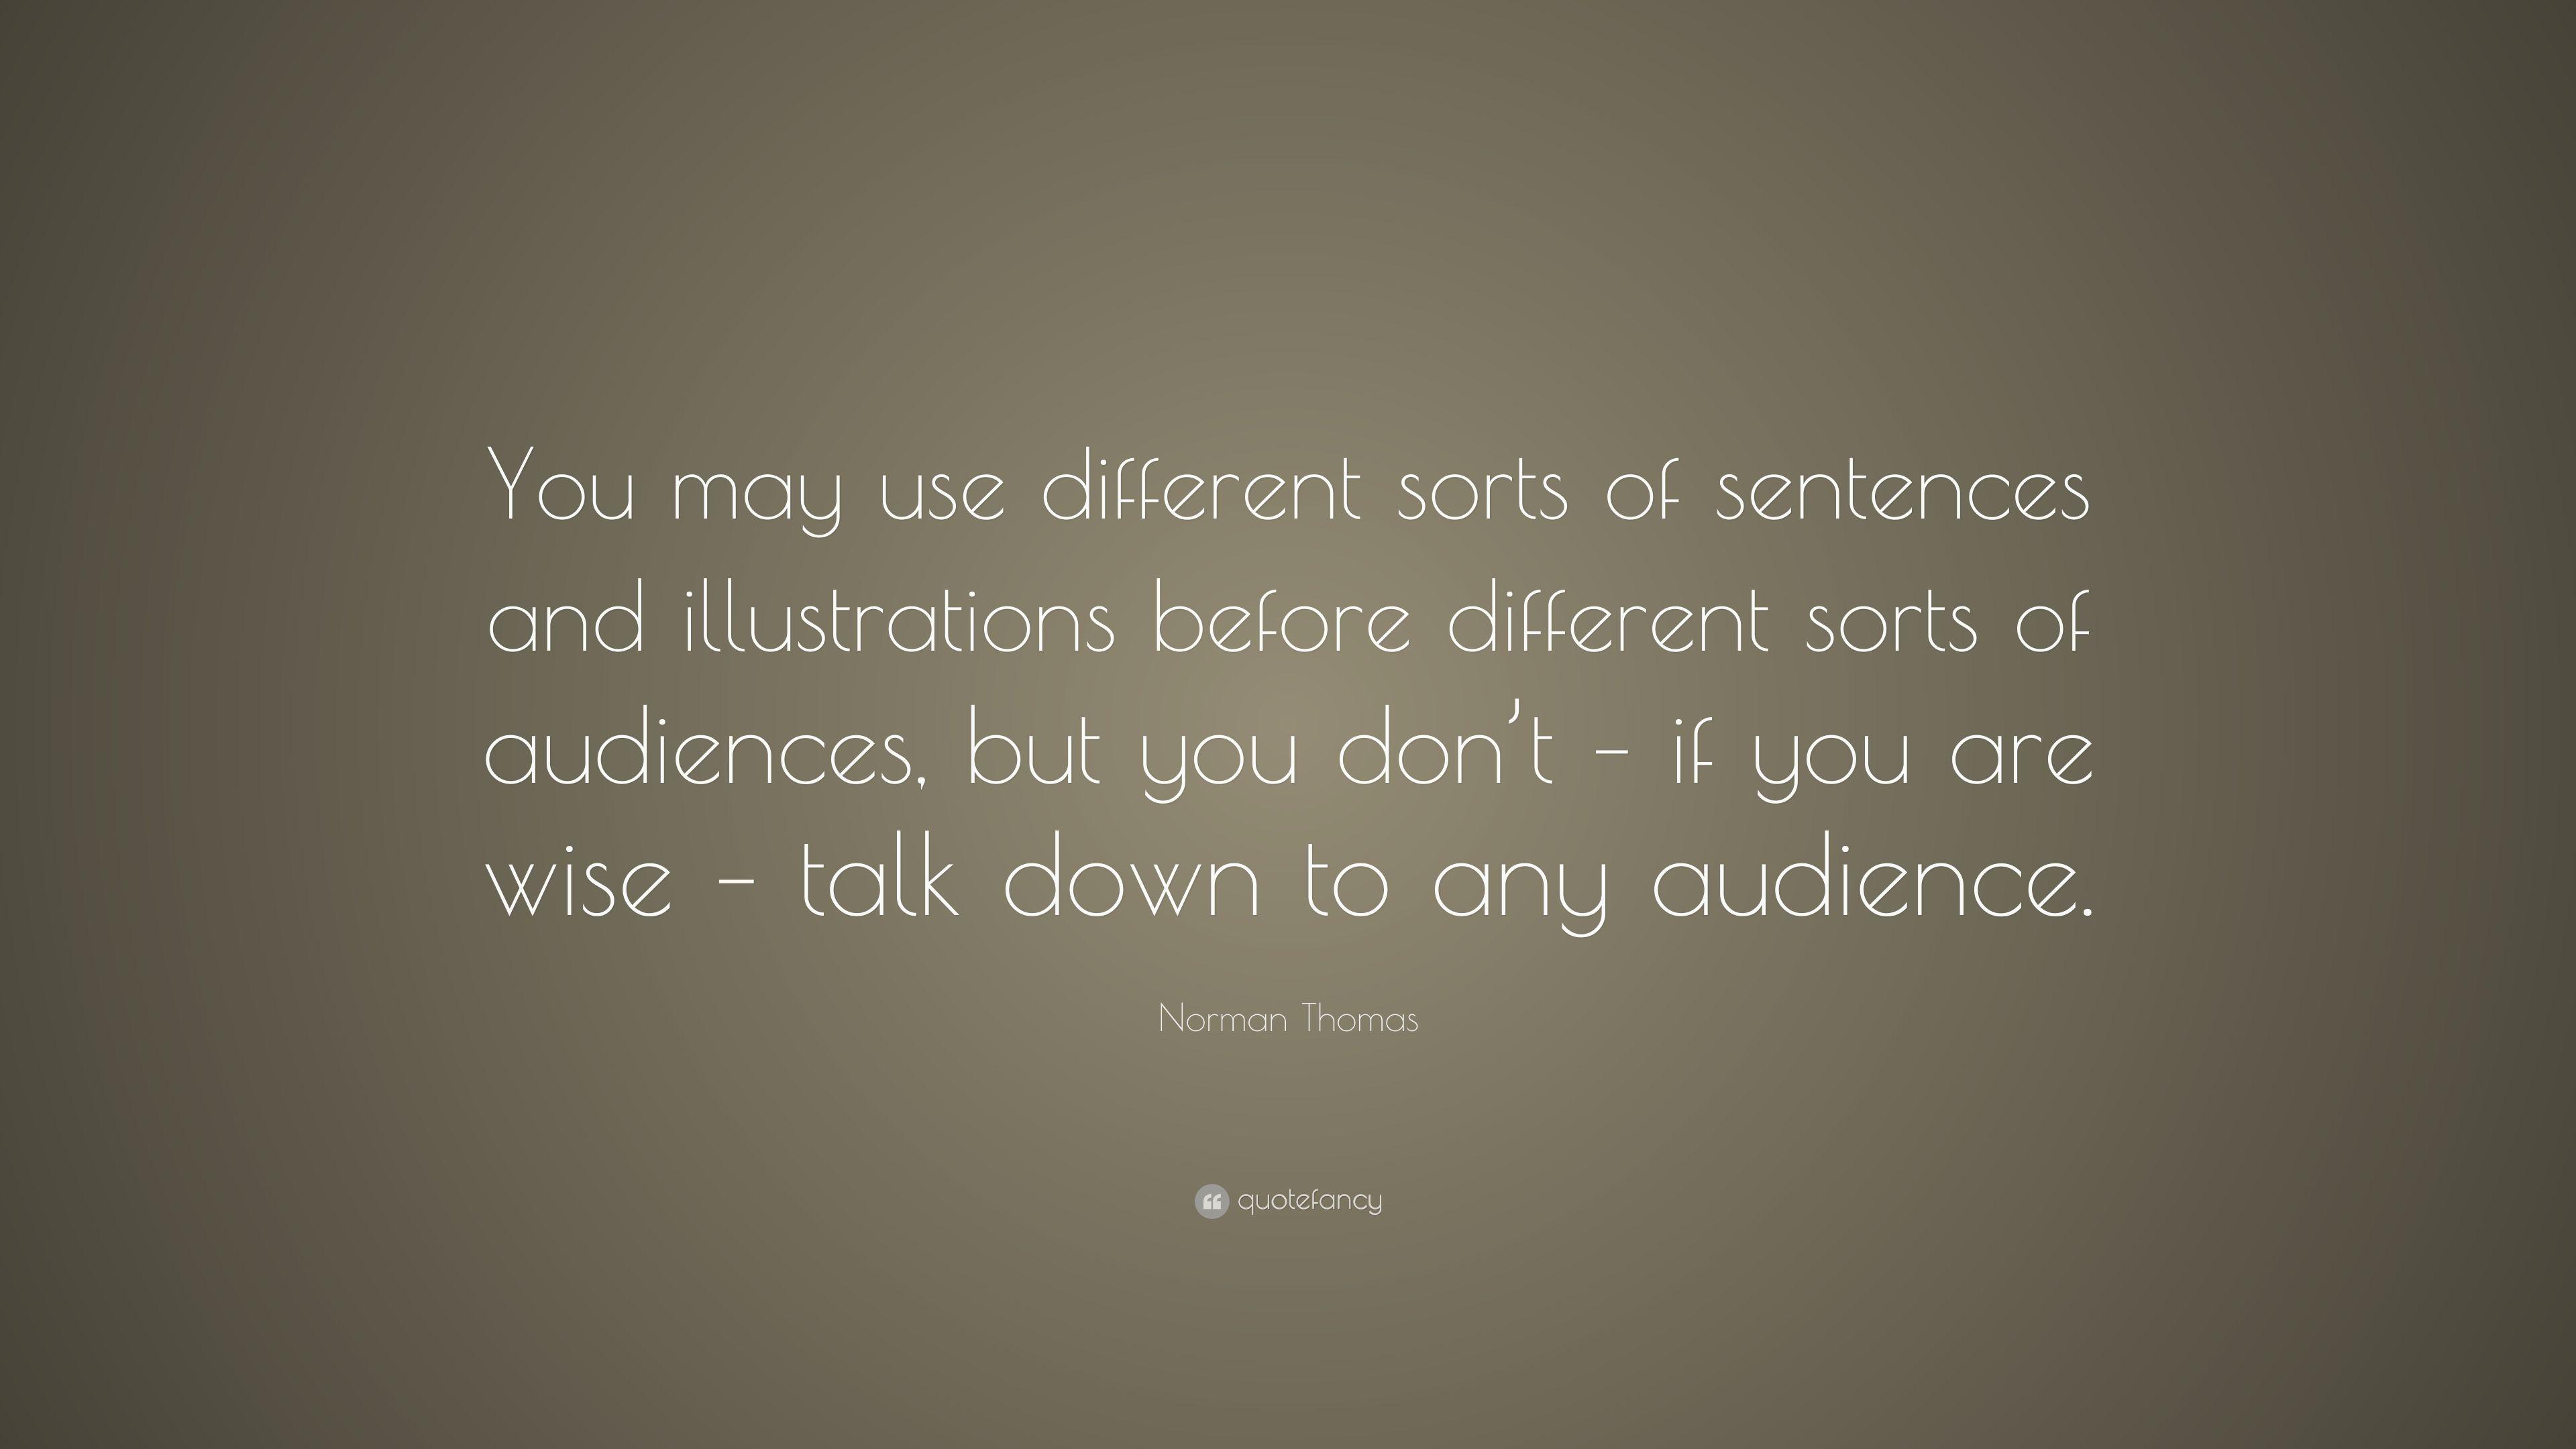 Norman Thomas Quote: “You may use different sorts of sentences